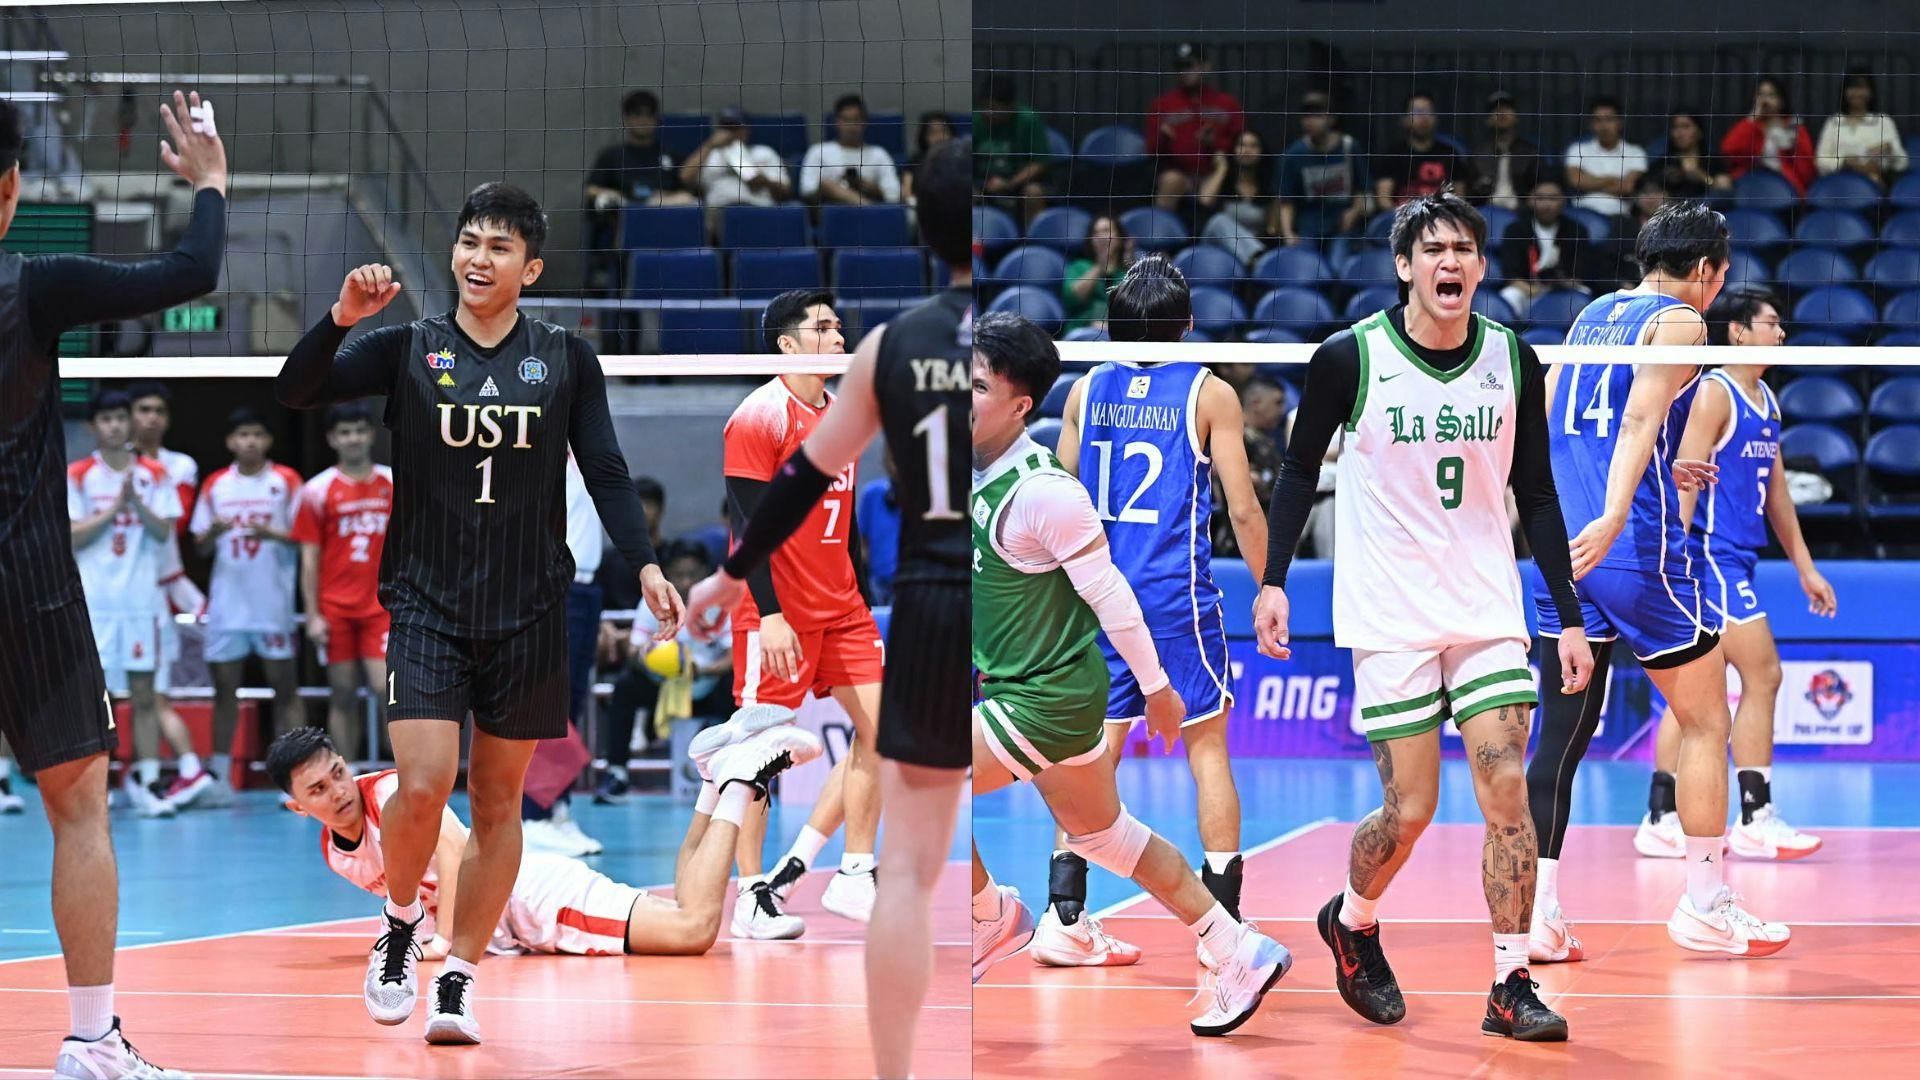 UAAP: UST secures last Final Four slot thanks to win and La Salle